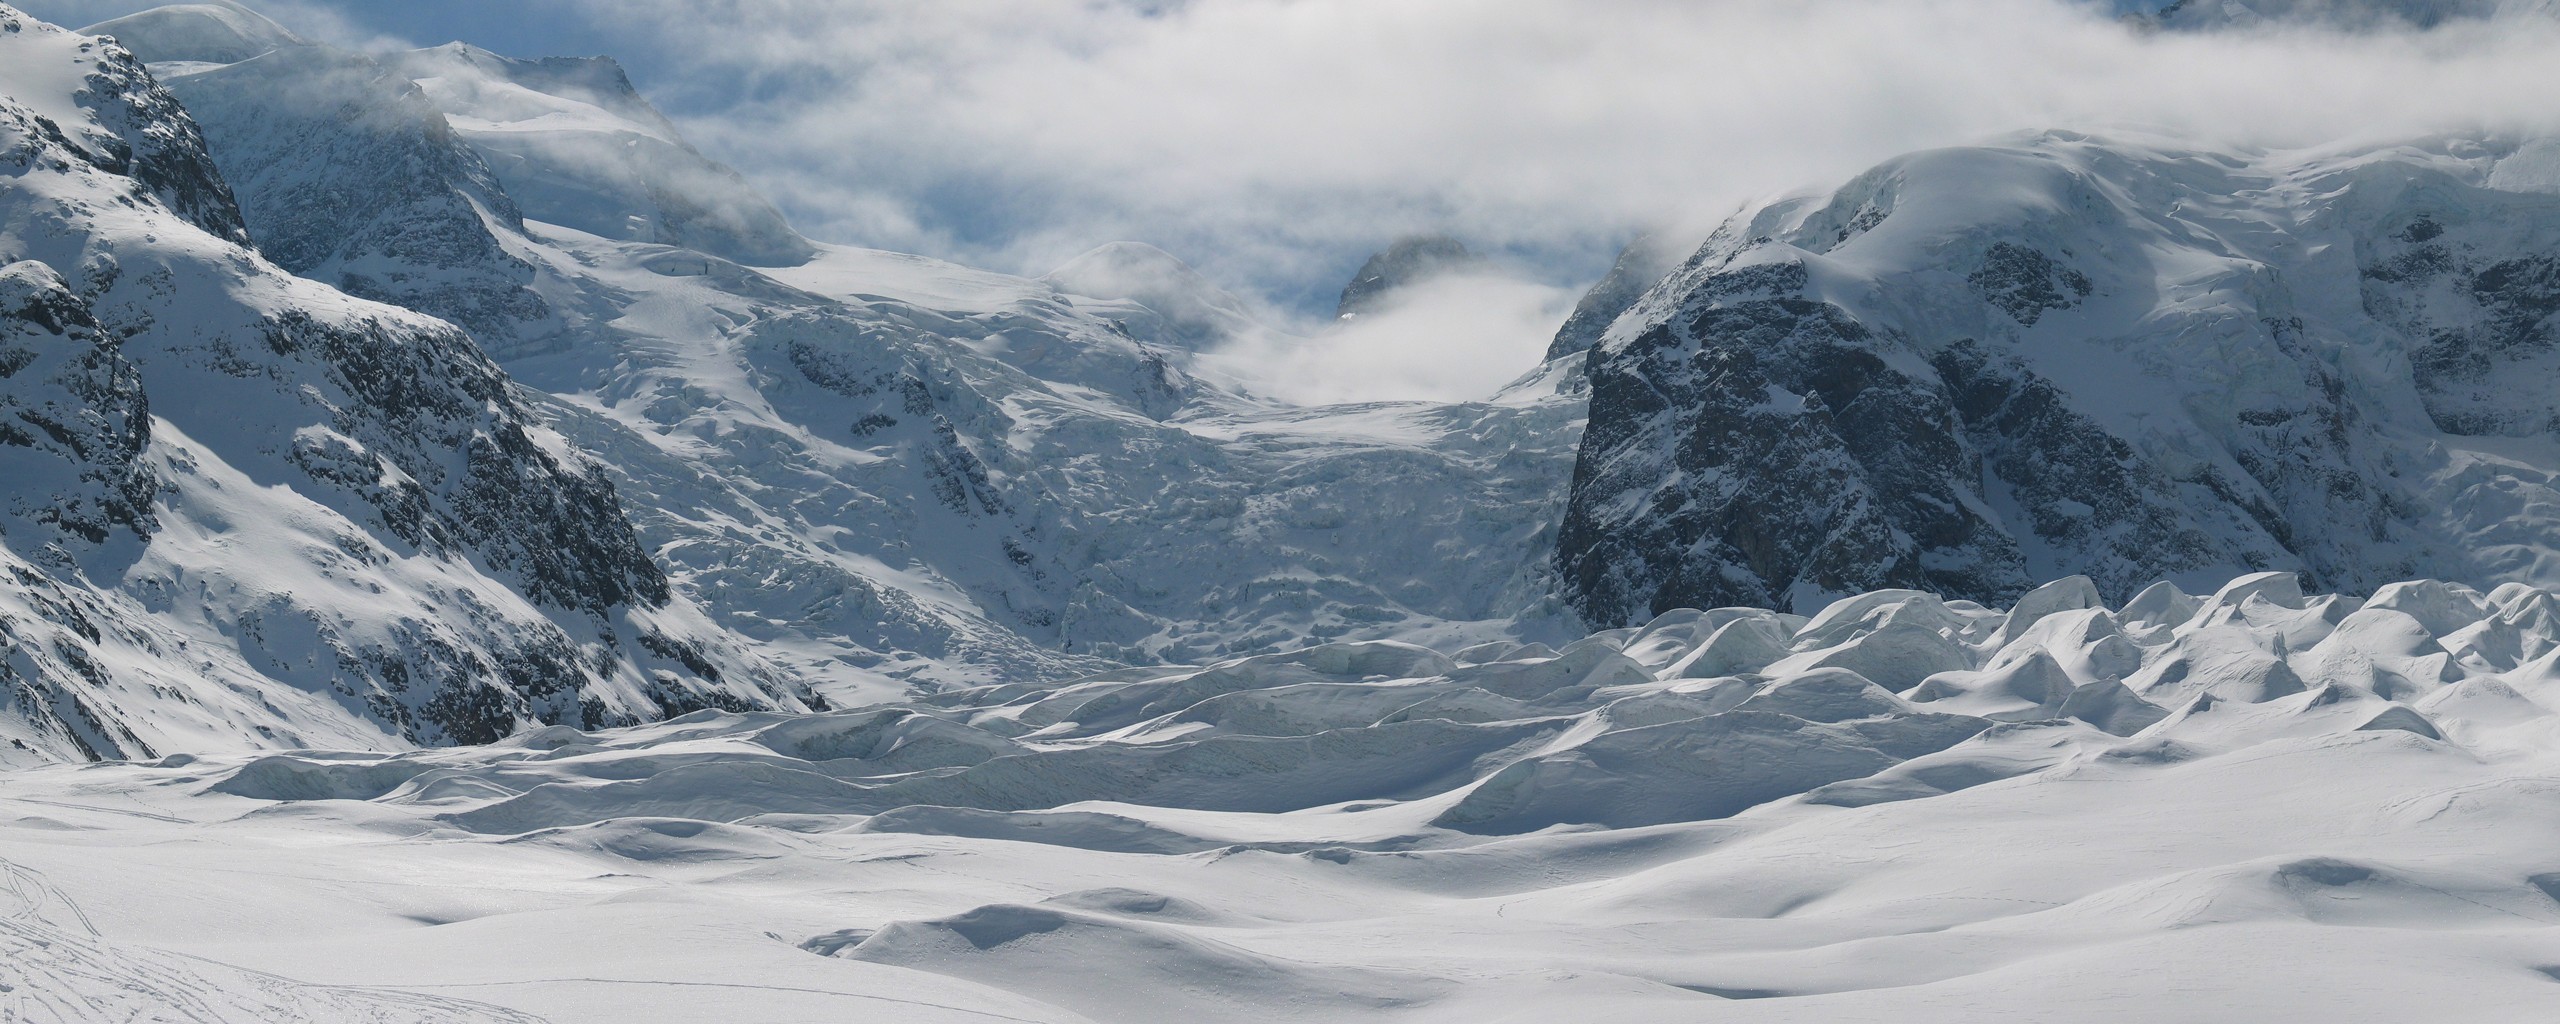 General 2560x1024 snow mountains Switzerland nature landscape snowy peak cold ice outdoors